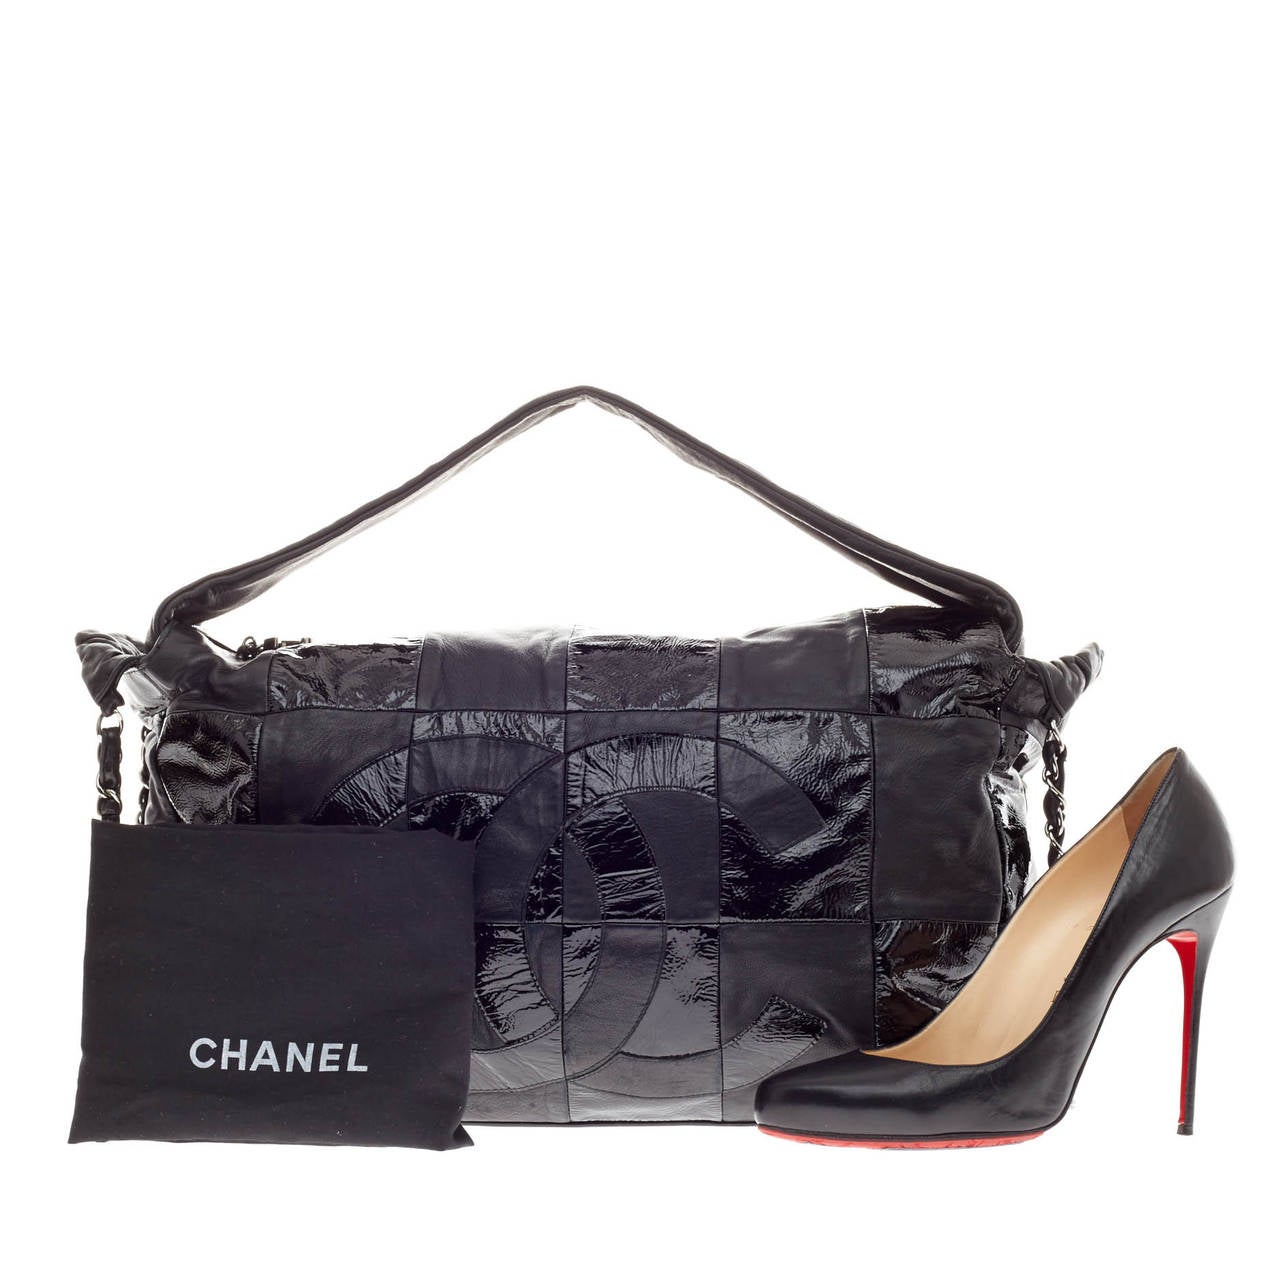 This authentic Chanel Brooklyn Leather Patchwork Convertible Hobo in black is crafted with alternating patches of soft lambskin and patent leather with an oversized patent front CC logo. This bag features a thick end to end leather shoulder strap